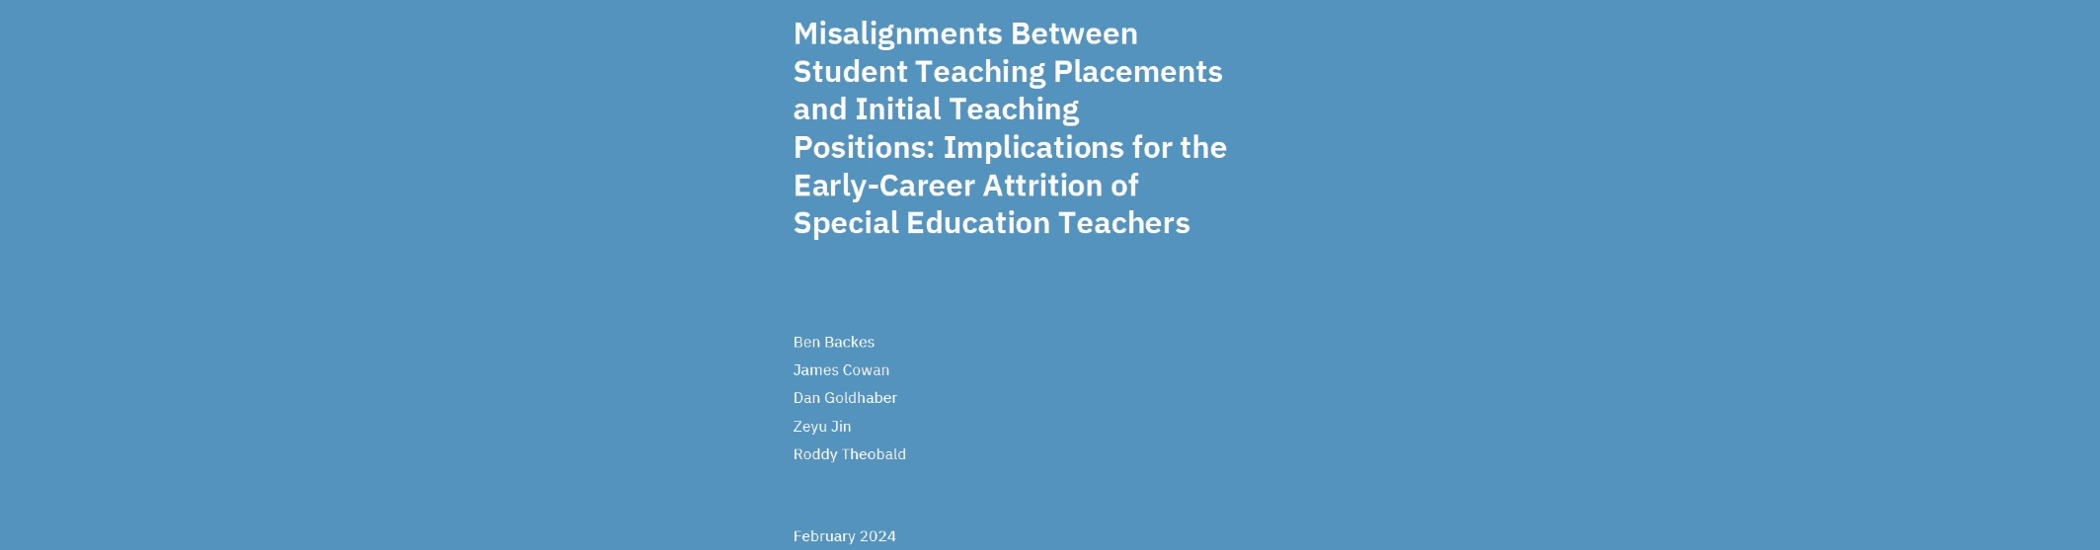 Misalignments Between Student Teaching Placements and Initial Teaching Positions: Implications for the Early-Career Attrition of Special Education Teachers